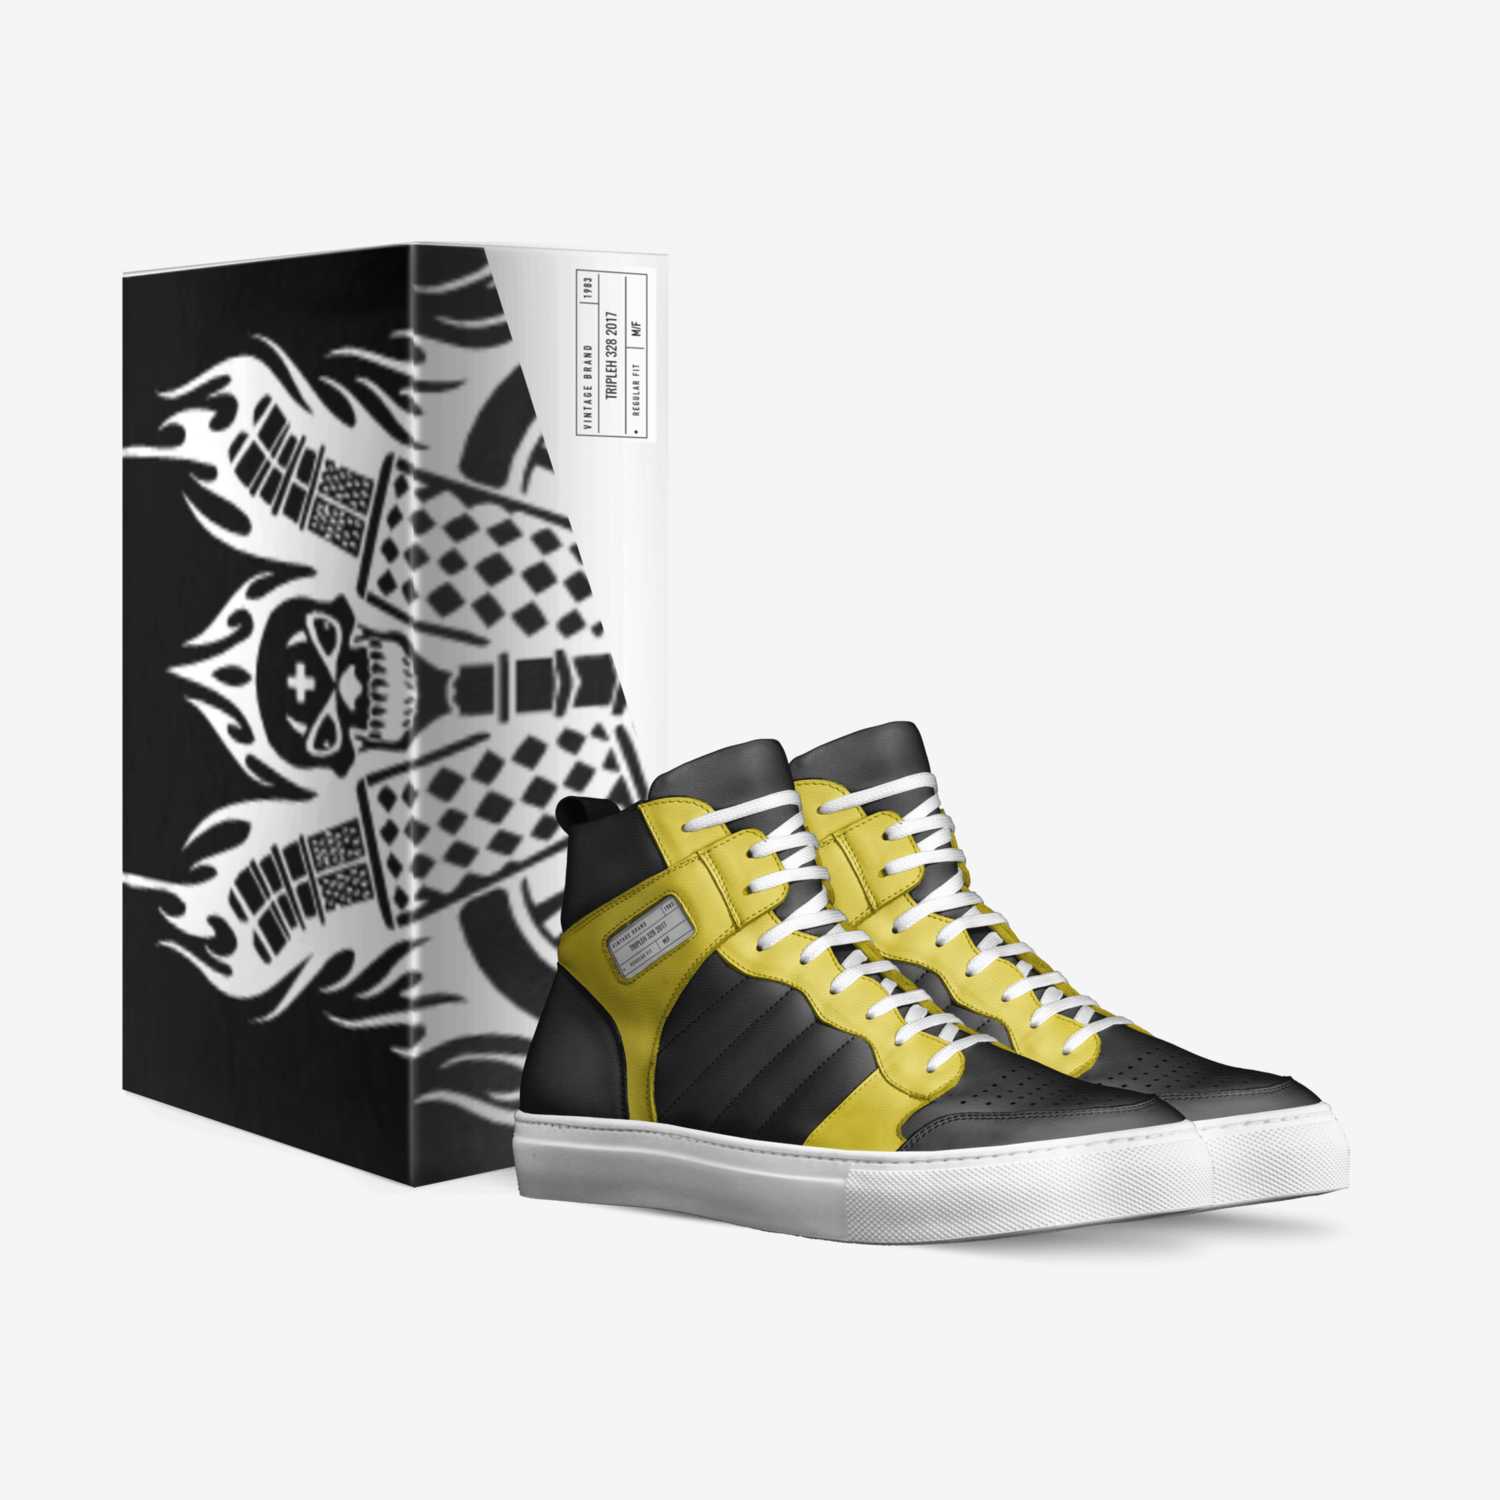 TRIPLEH 328 2017  custom made in Italy shoes by Anthonylancaster Mr. | Box view